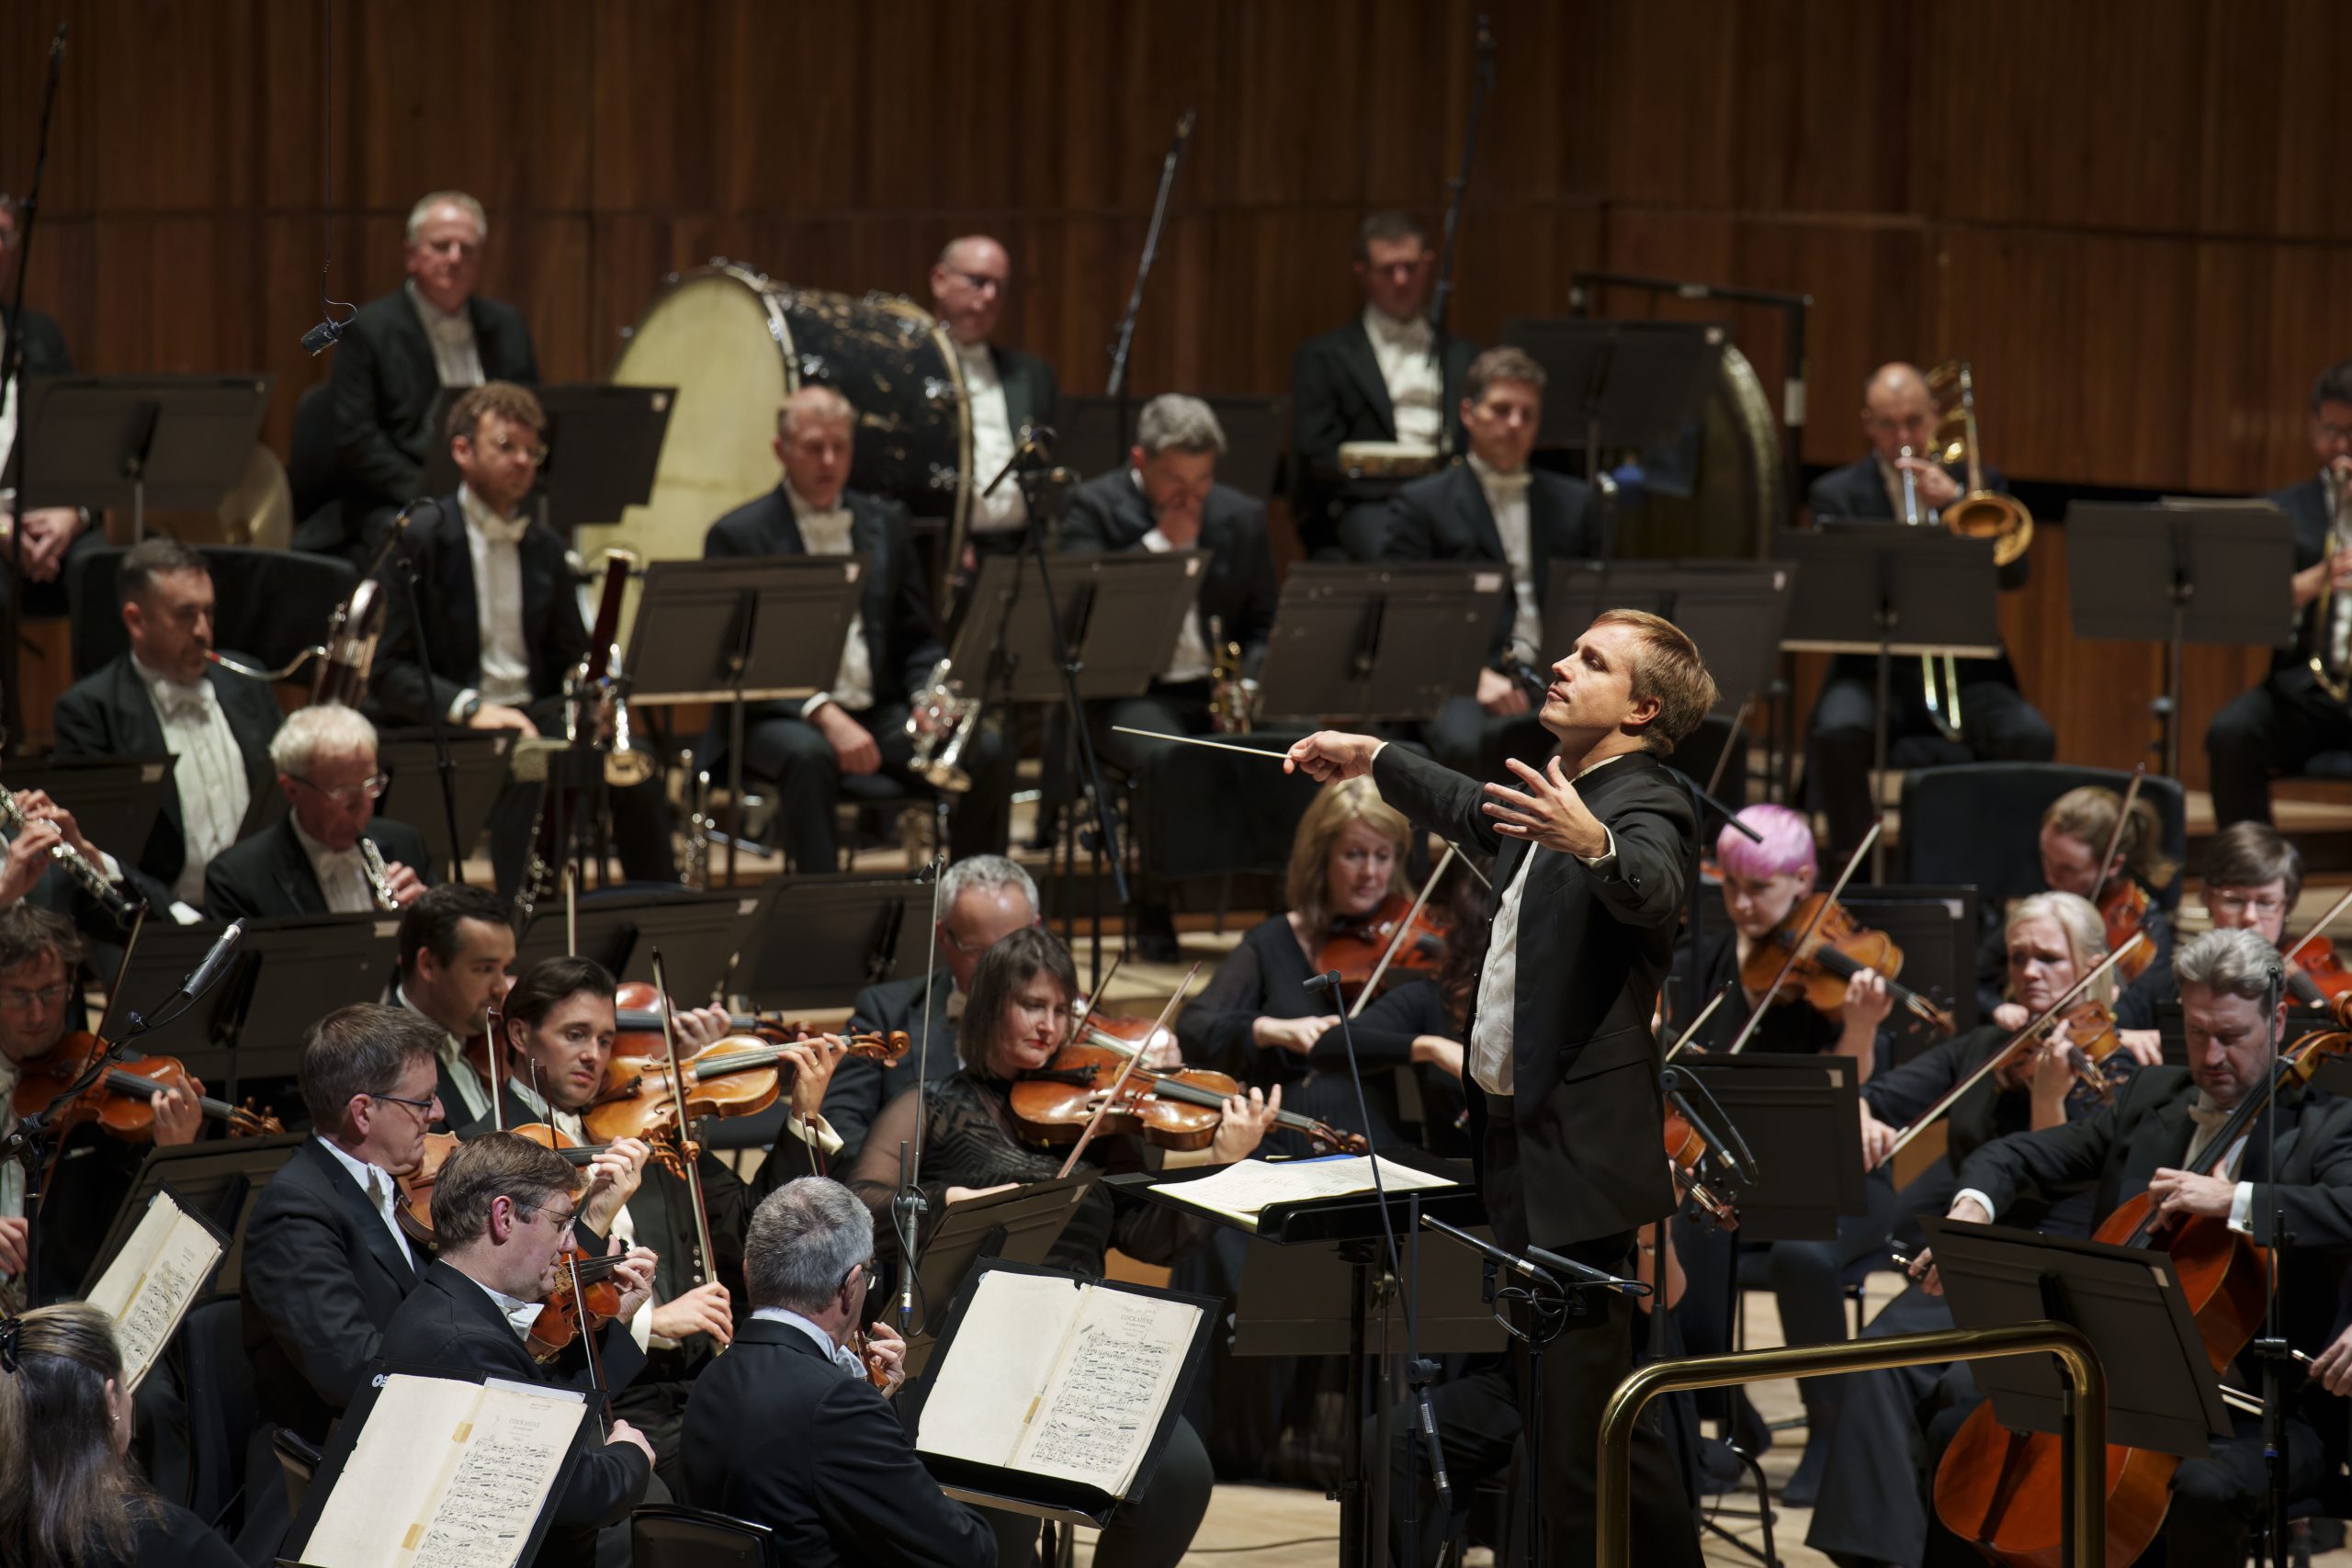 The RPO perform Rachmaninov's Symphony No.2 as part of the Icons Rediscovered series at Southbankcentre's Royal Festival Hall. Soprano Louise Aldersop stepped in at very short notice to replace Jennifer France.